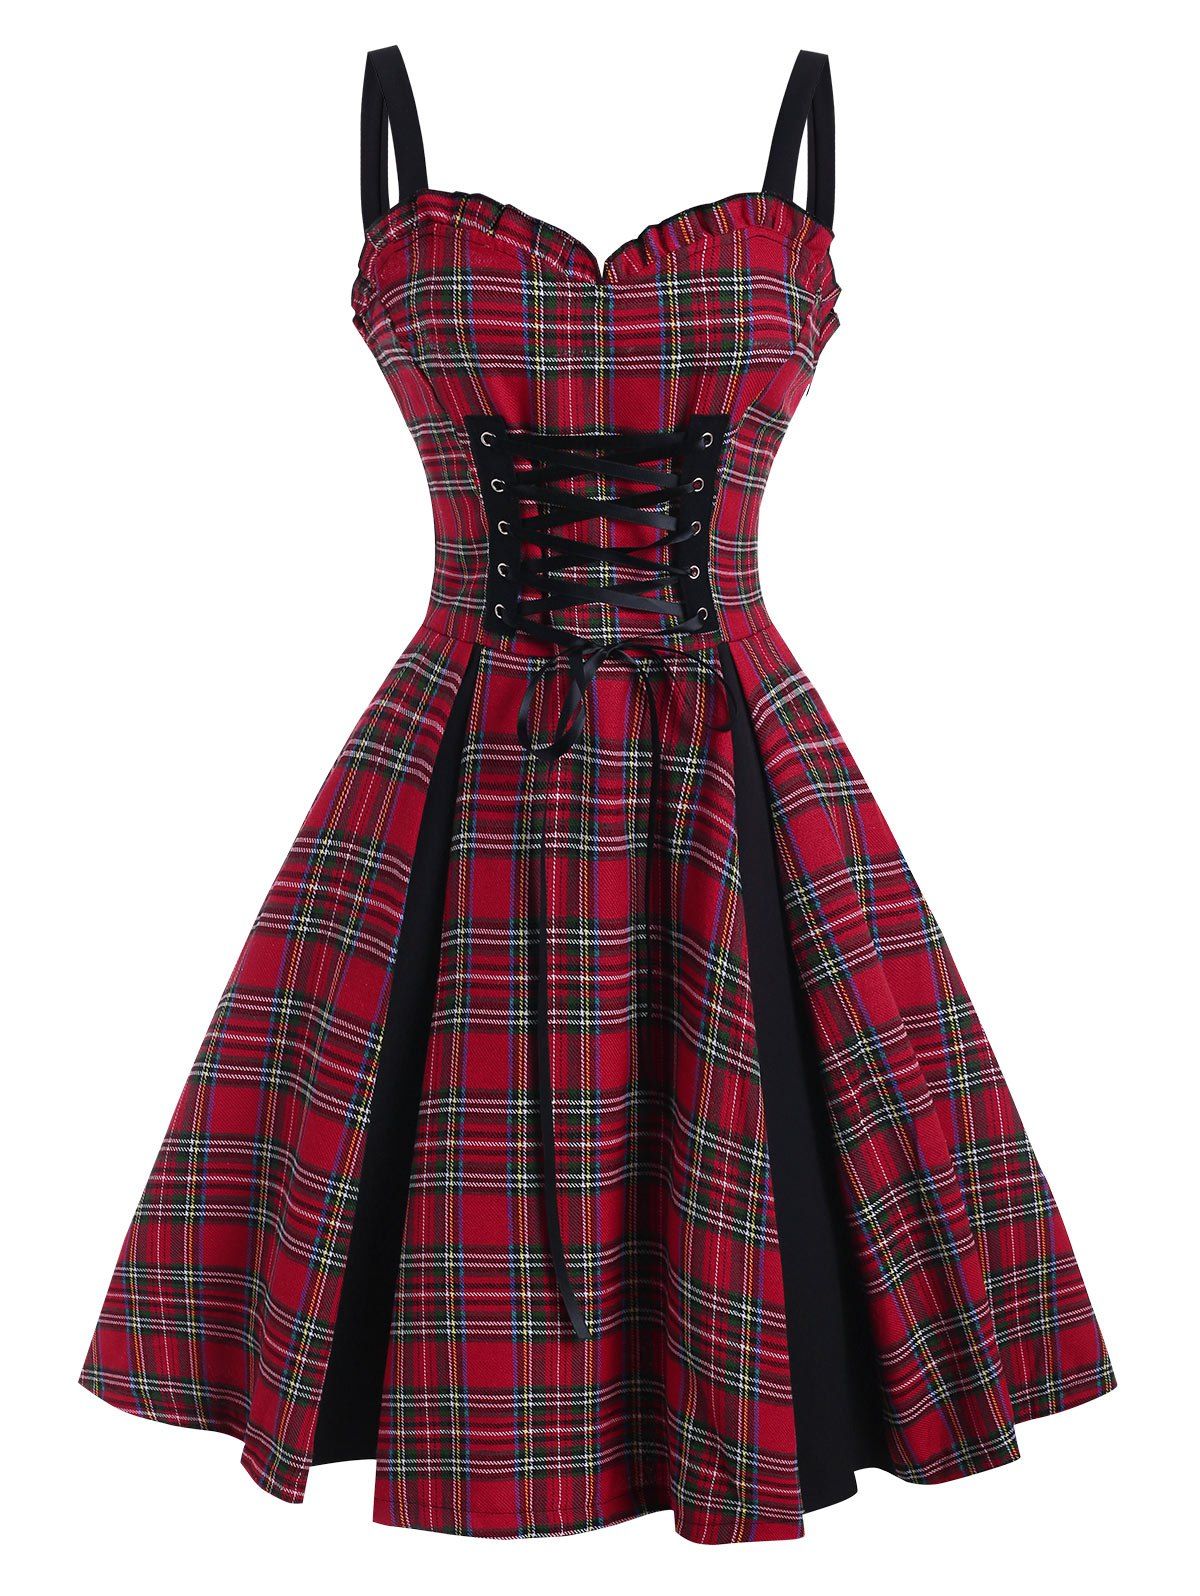 Summer Plaid Lace Up Corset Style Ruffle Sweetheart Dress - RED S